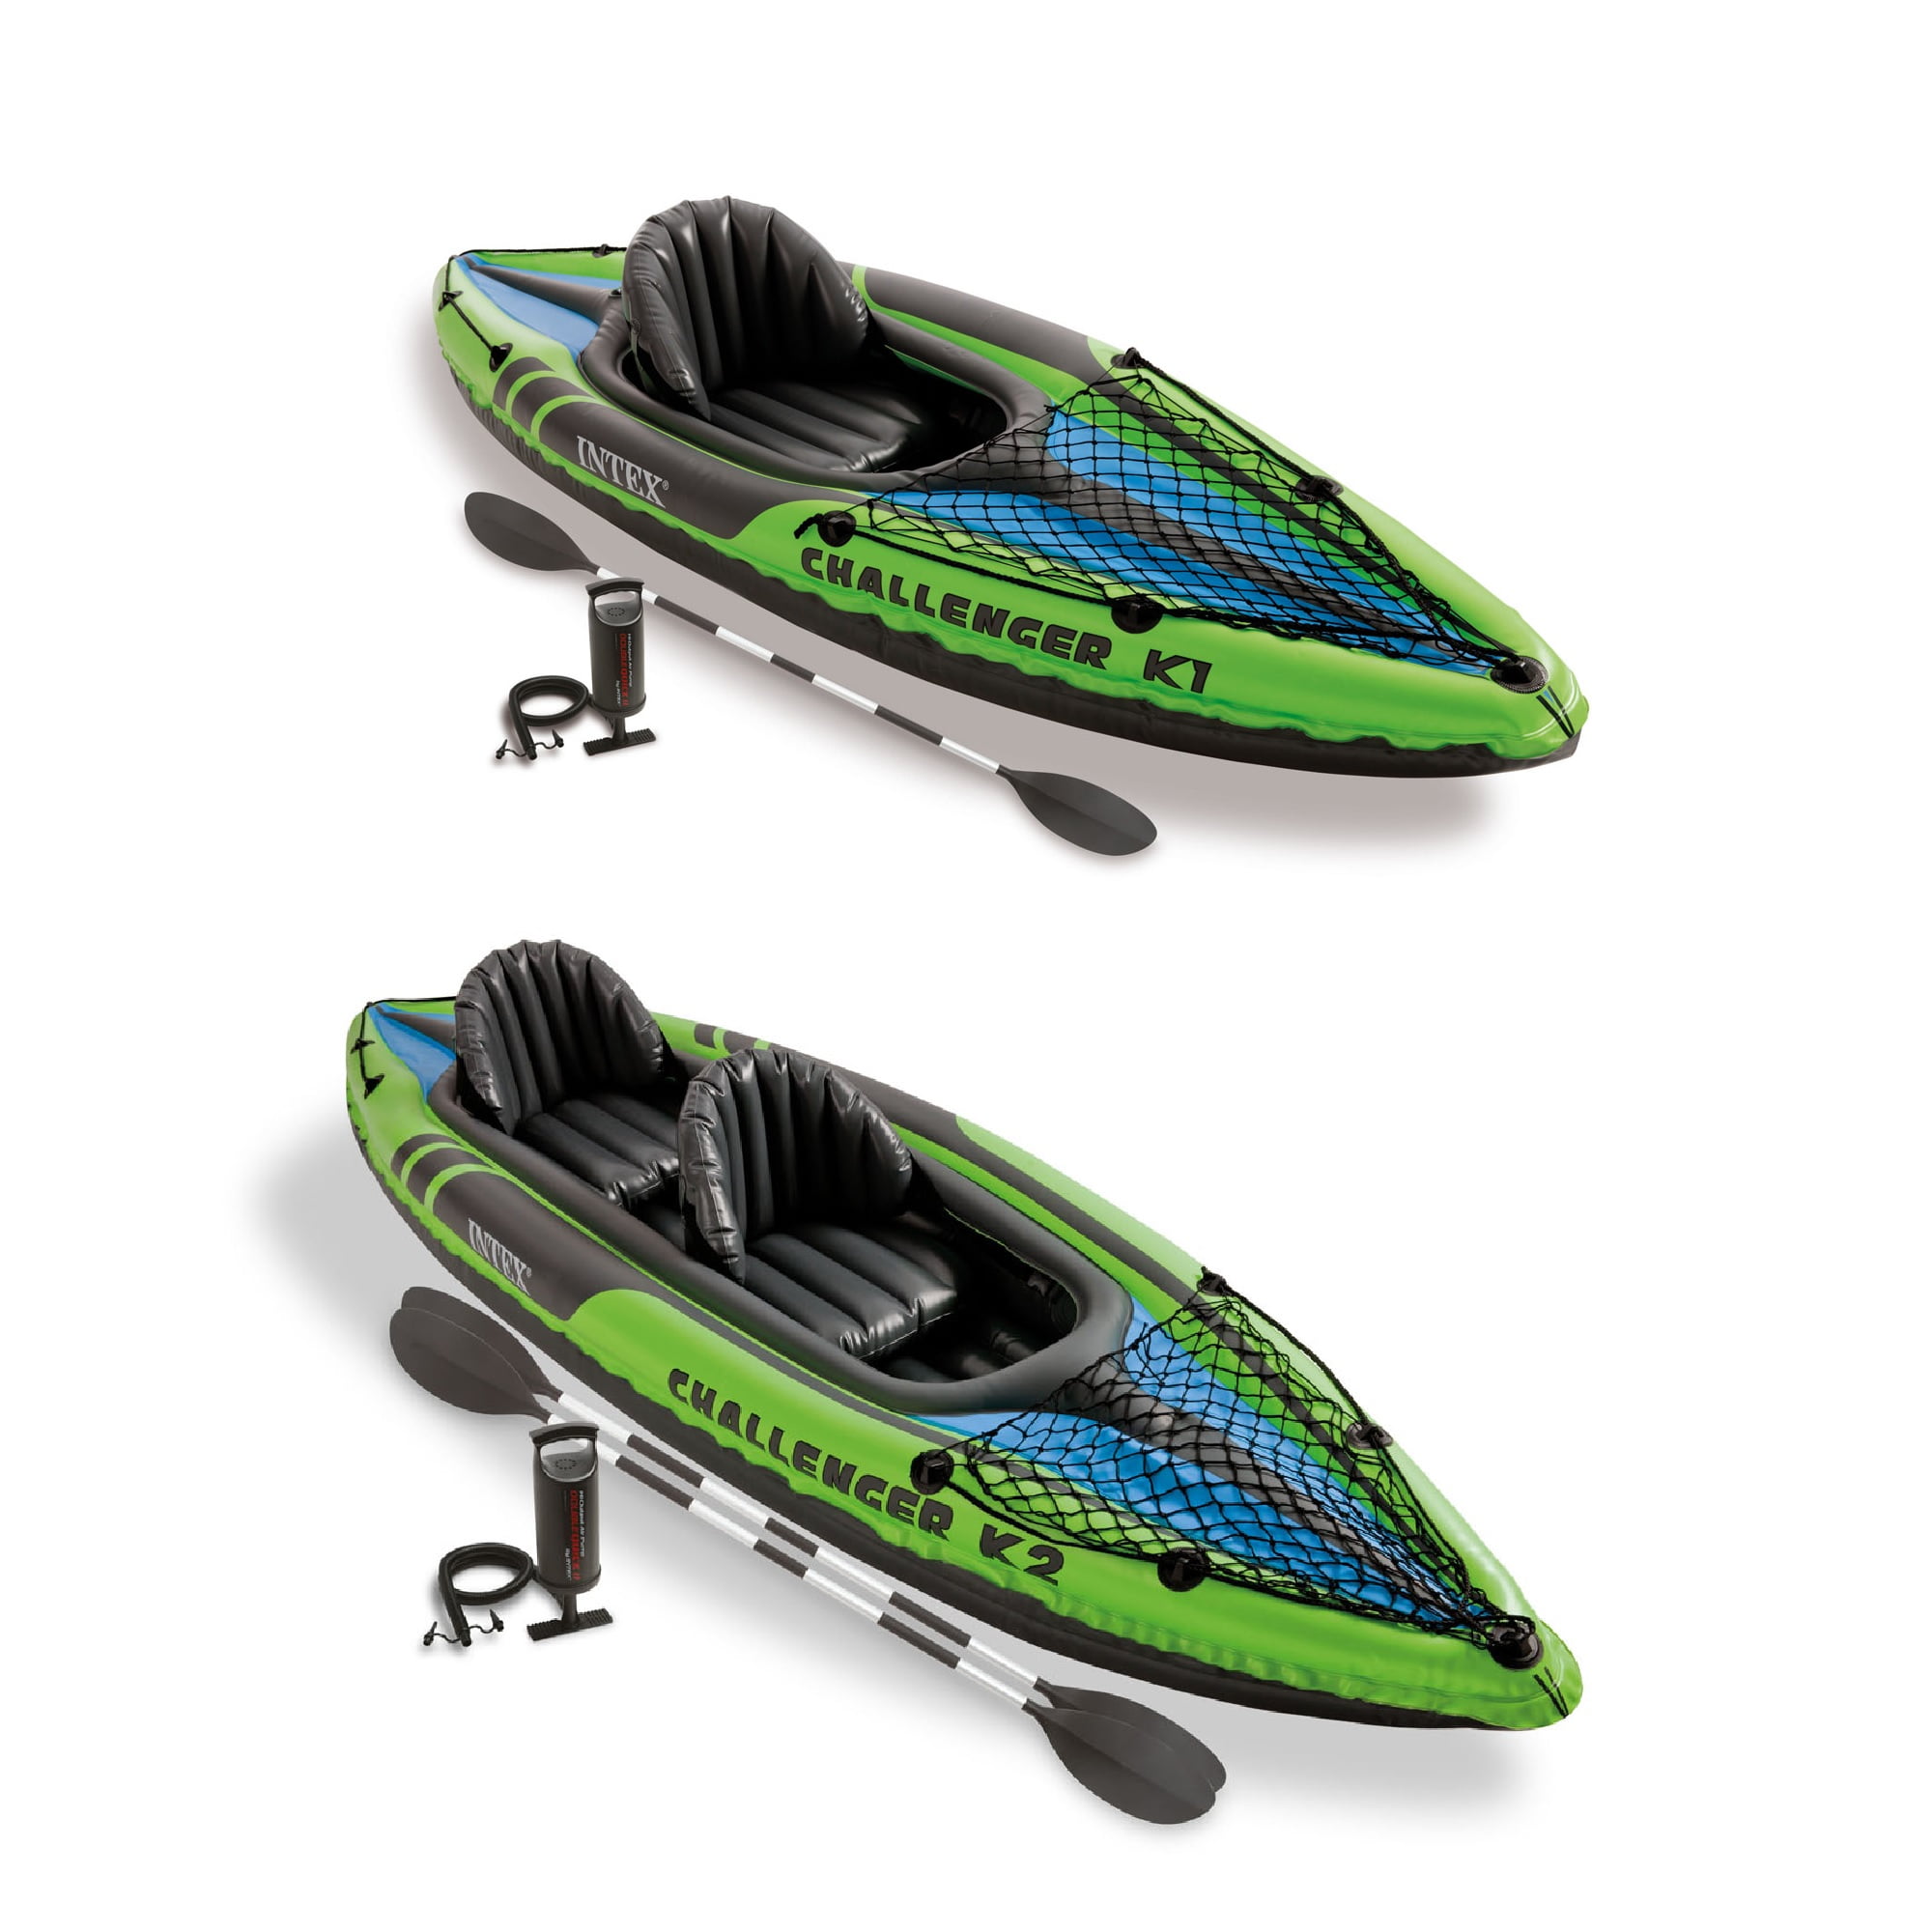 Intex Challenger K1 One Person Inflatable Kayak Kit With Oar And Pump 